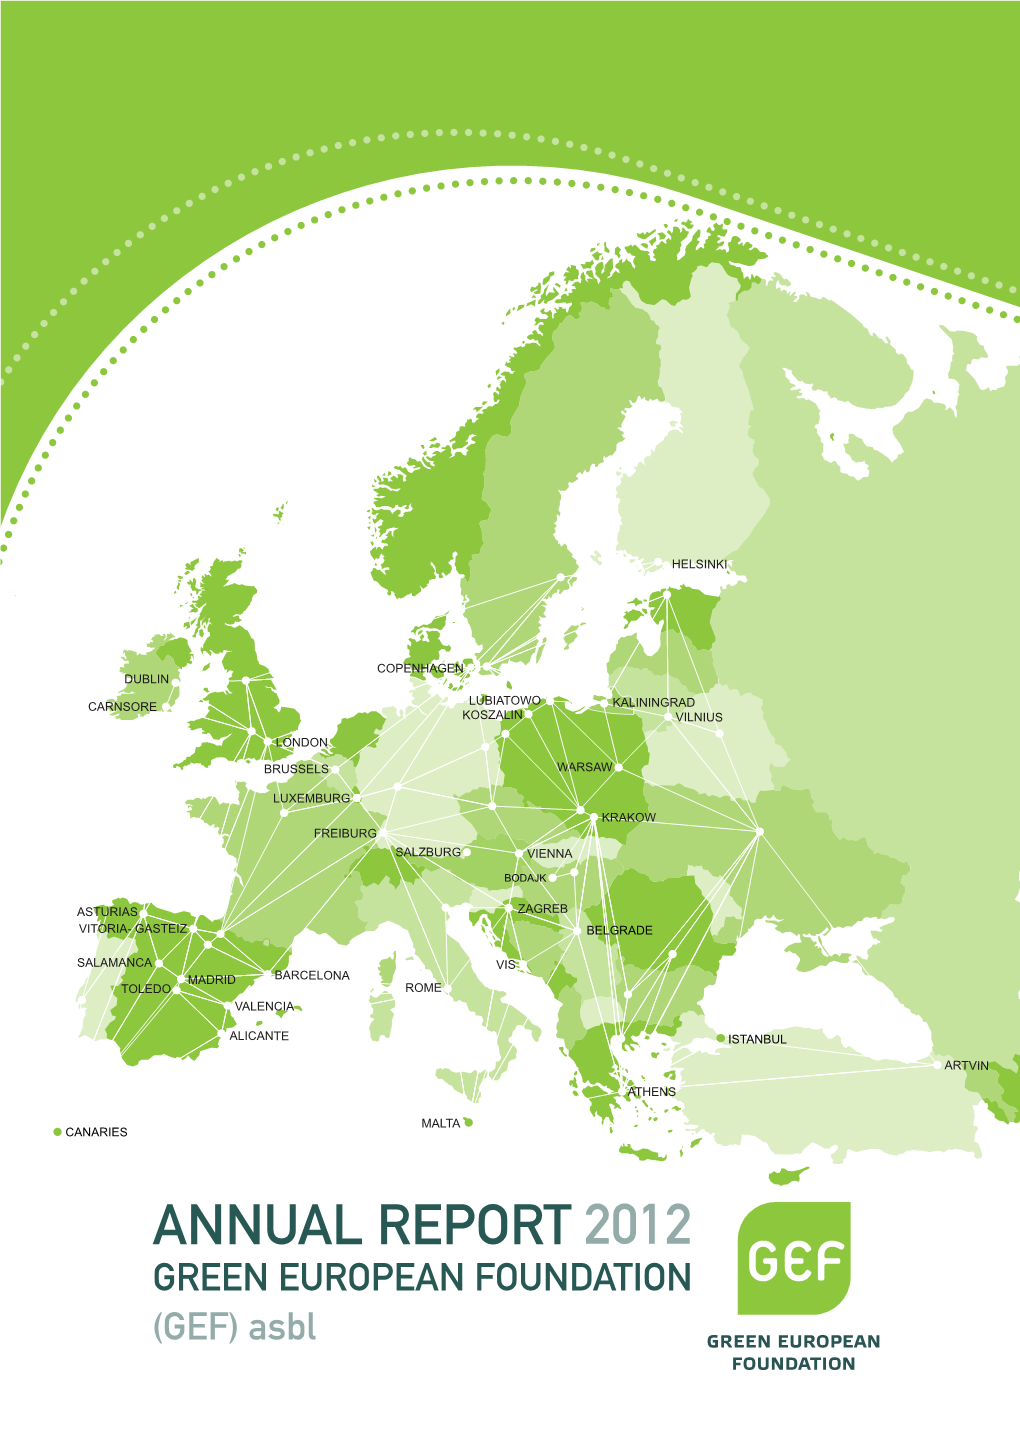 ANNUAL REPORT GREEN EUROPEAN FOUNDATION (GEF) Asbl CONTENTS